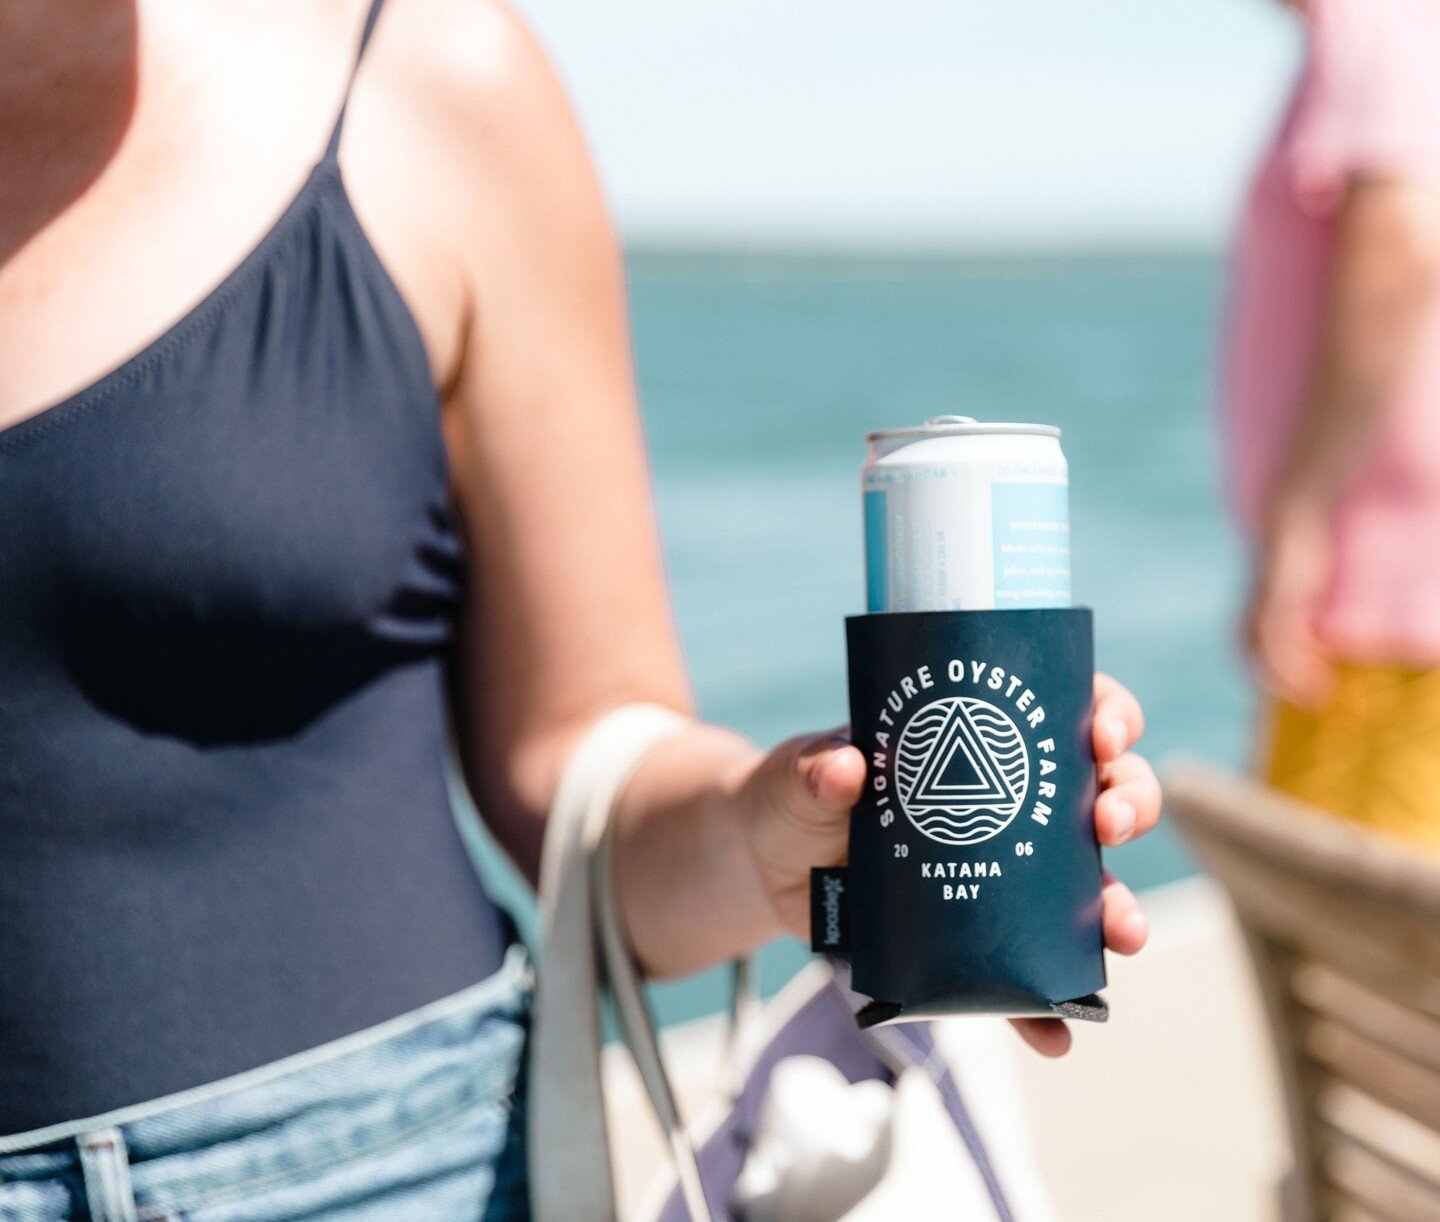 Summer is coming...we can feel it! One of our favorite #thingstodoinEdgartown is a sunset cruise with @signatureoysterfarm 🦪  Cruise around Katama Bay with Julia &amp; Ryan, the husband and wife team behind the brand! All the oysters you can eat, to